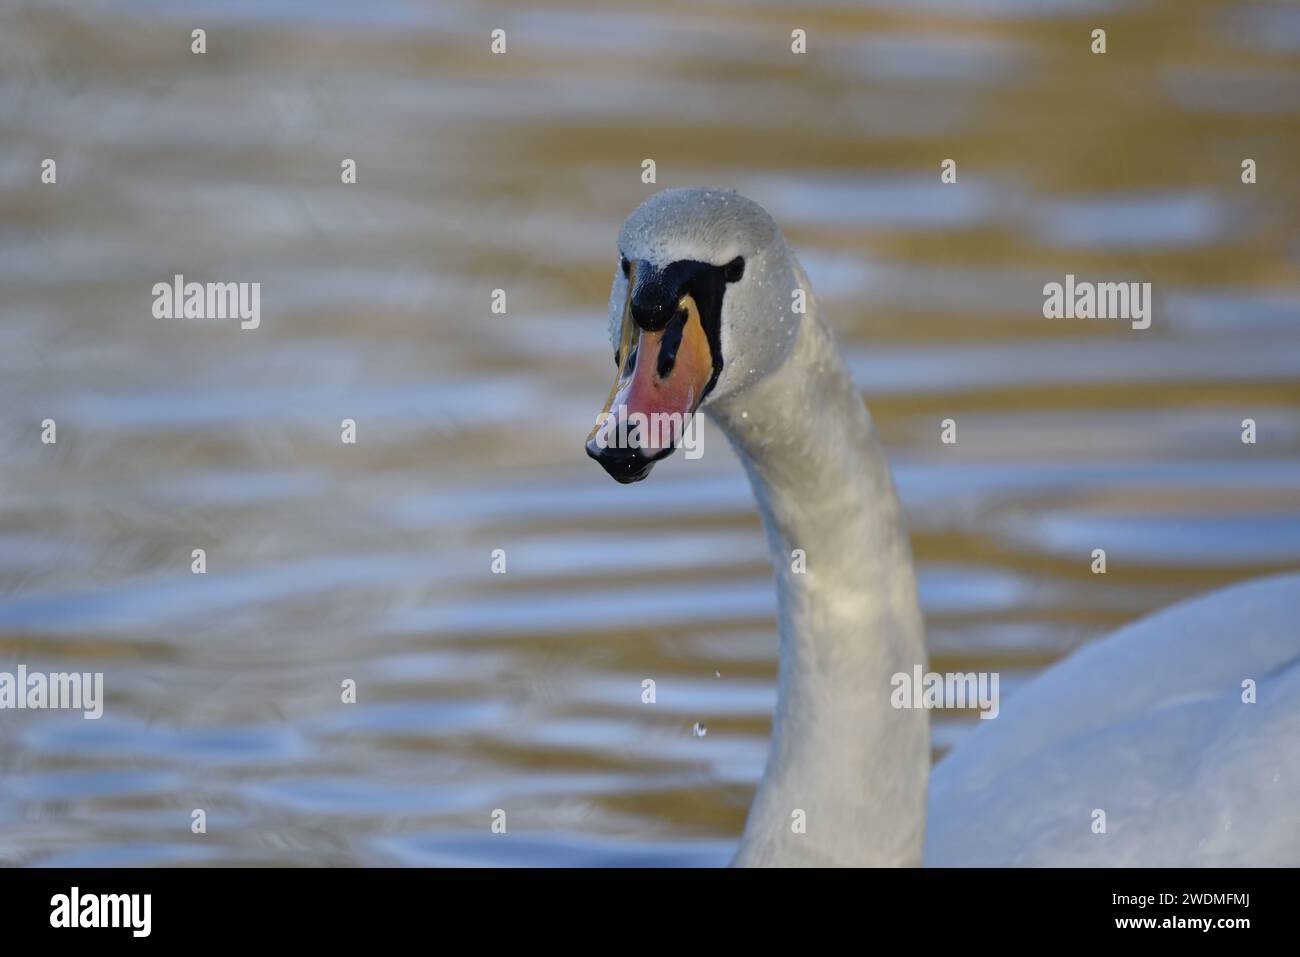 Close-Up Image of a Mute Swan (Cygnus olor) Swimming in From Right of Image, Facing and Looking into Camera, with Water Droplets Visible, UK Winter Stock Photo